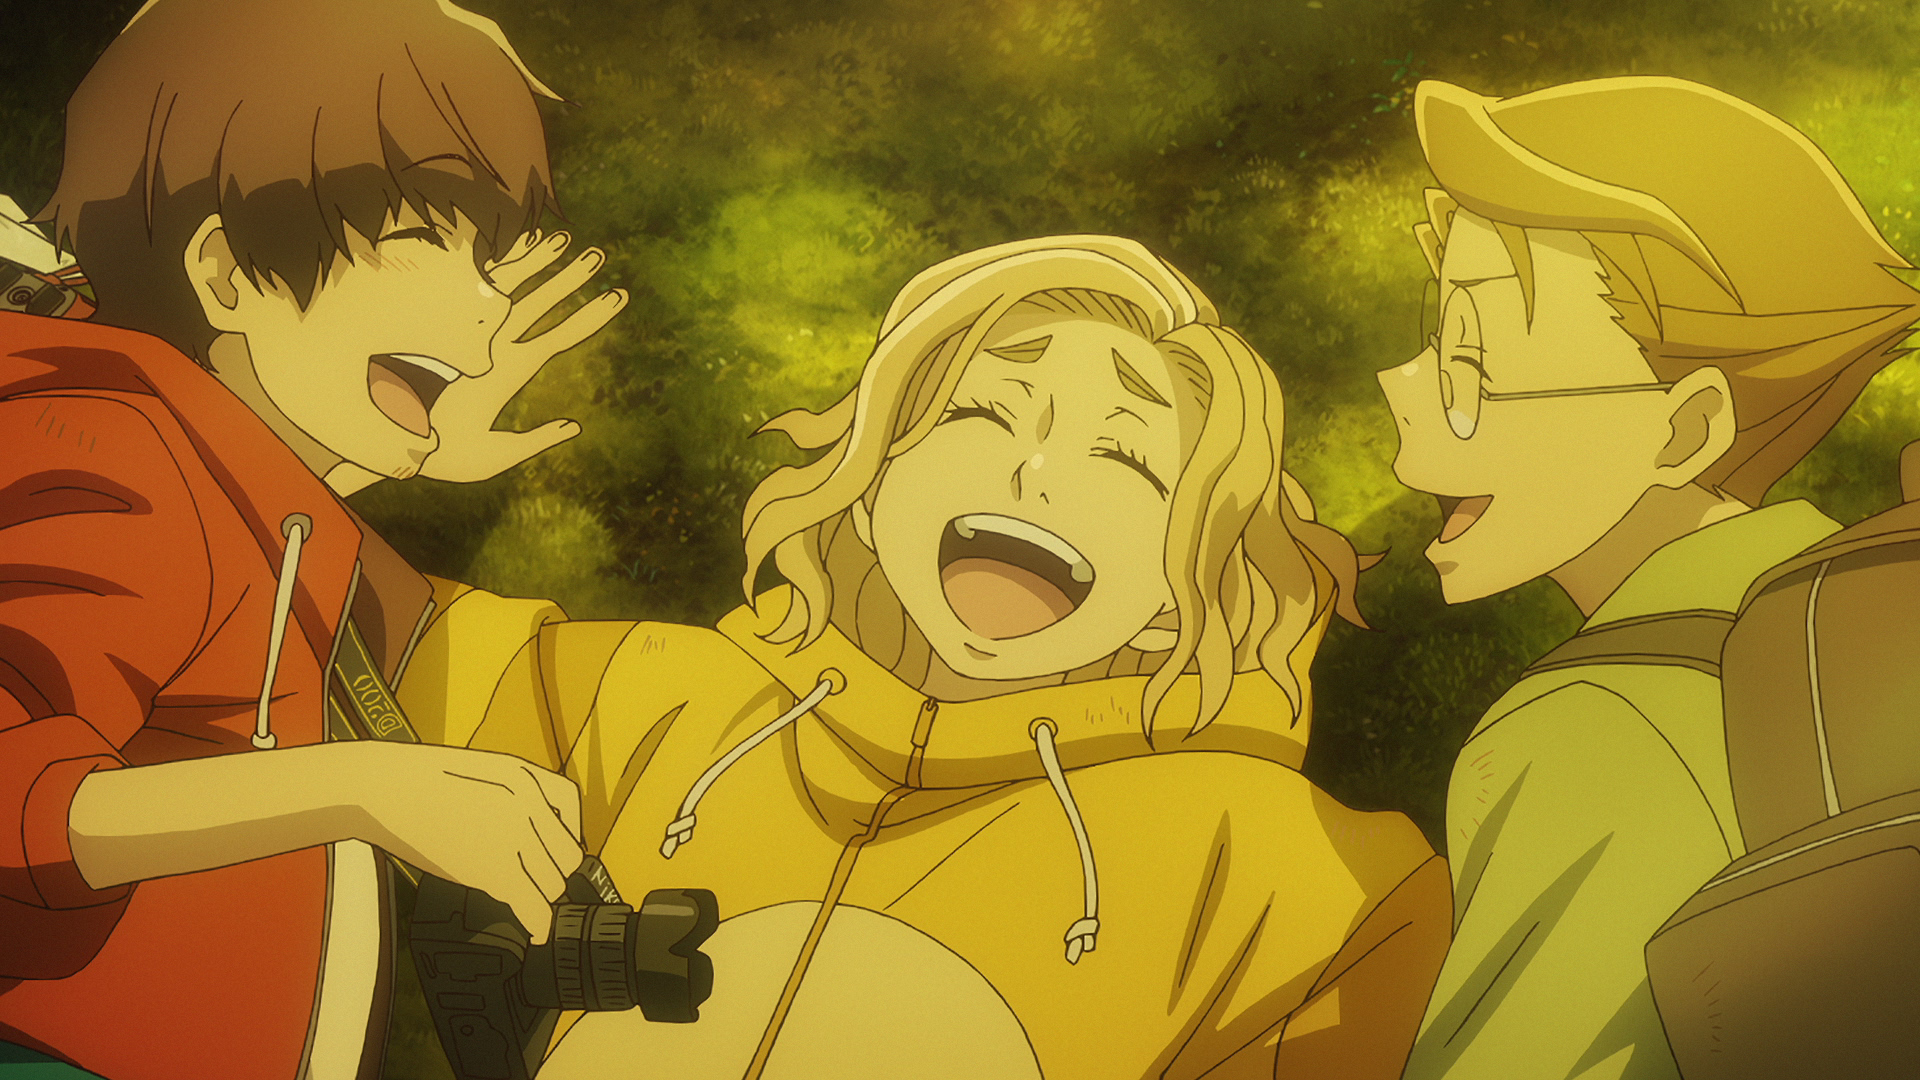 Roma, Toto, and Drop share a moment of laughter in the shady woods in a scene from the 2022 theatrical anime film Goodbye, Don Glees!.